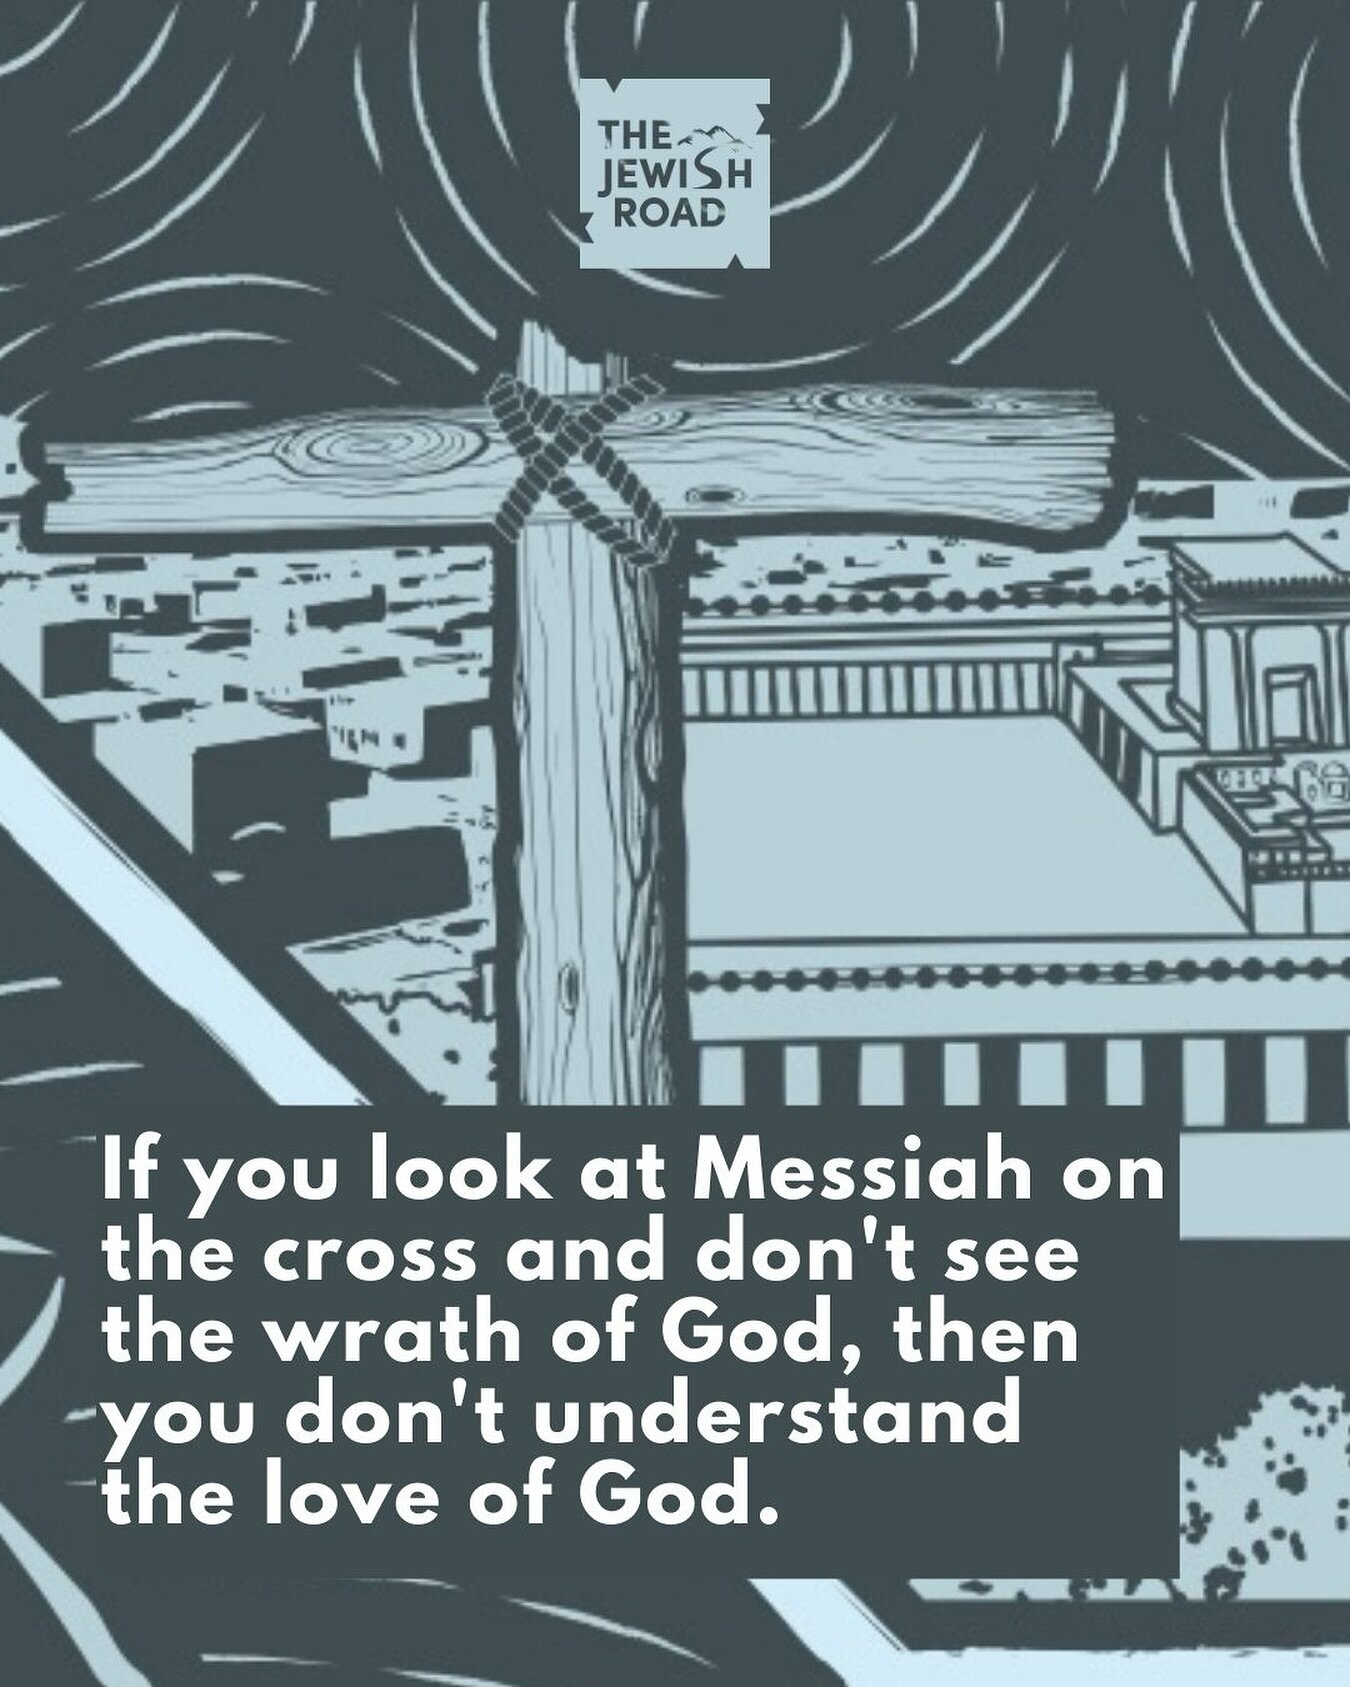 If you look at Messiah on the cross and don&rsquo;t see the wrath of God, then you don&rsquo;t understand the love of God.